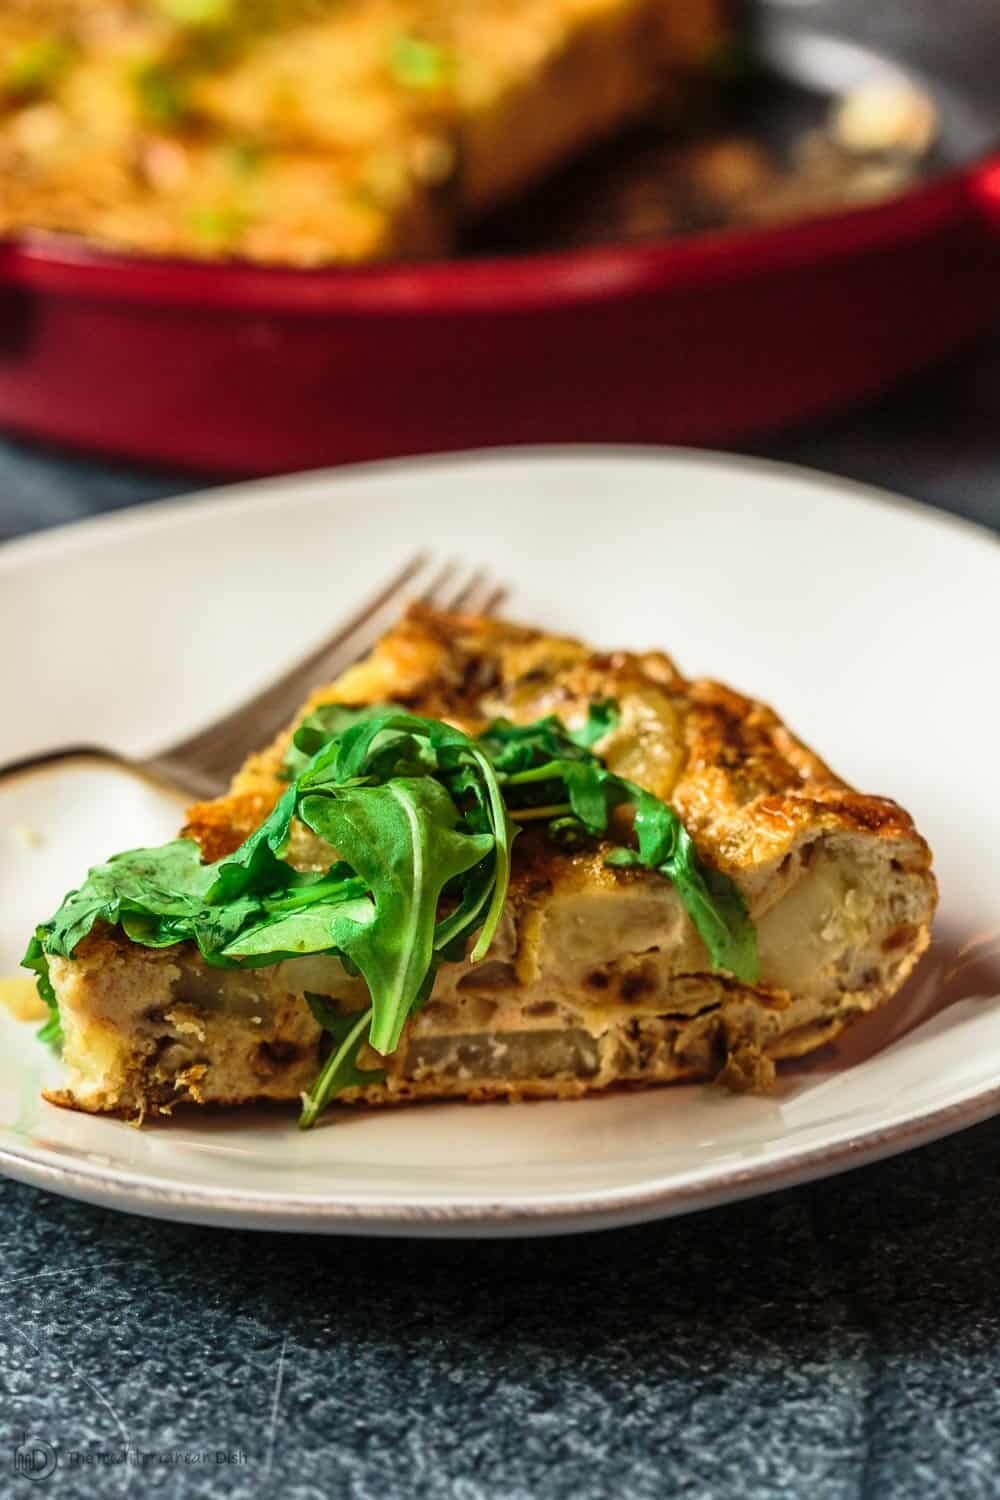 One slice of spanish omellete on a plate with a bit of arugula